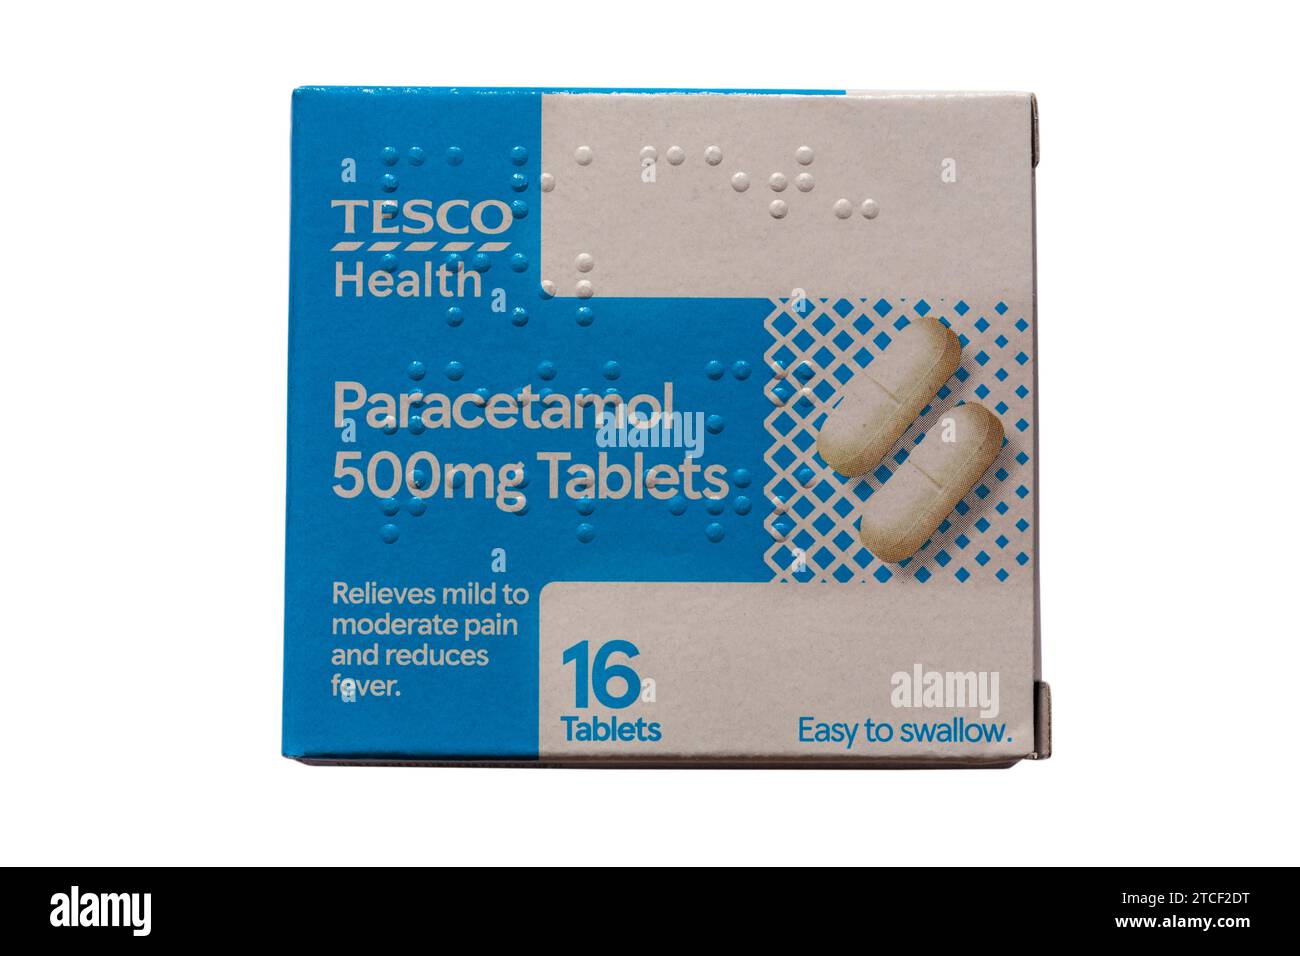 Pack of Tesco Health Paracetamol 500mg tablets isolated on white background 16 tablets relieves mild to moderate pain and reduces fever Stock Photo